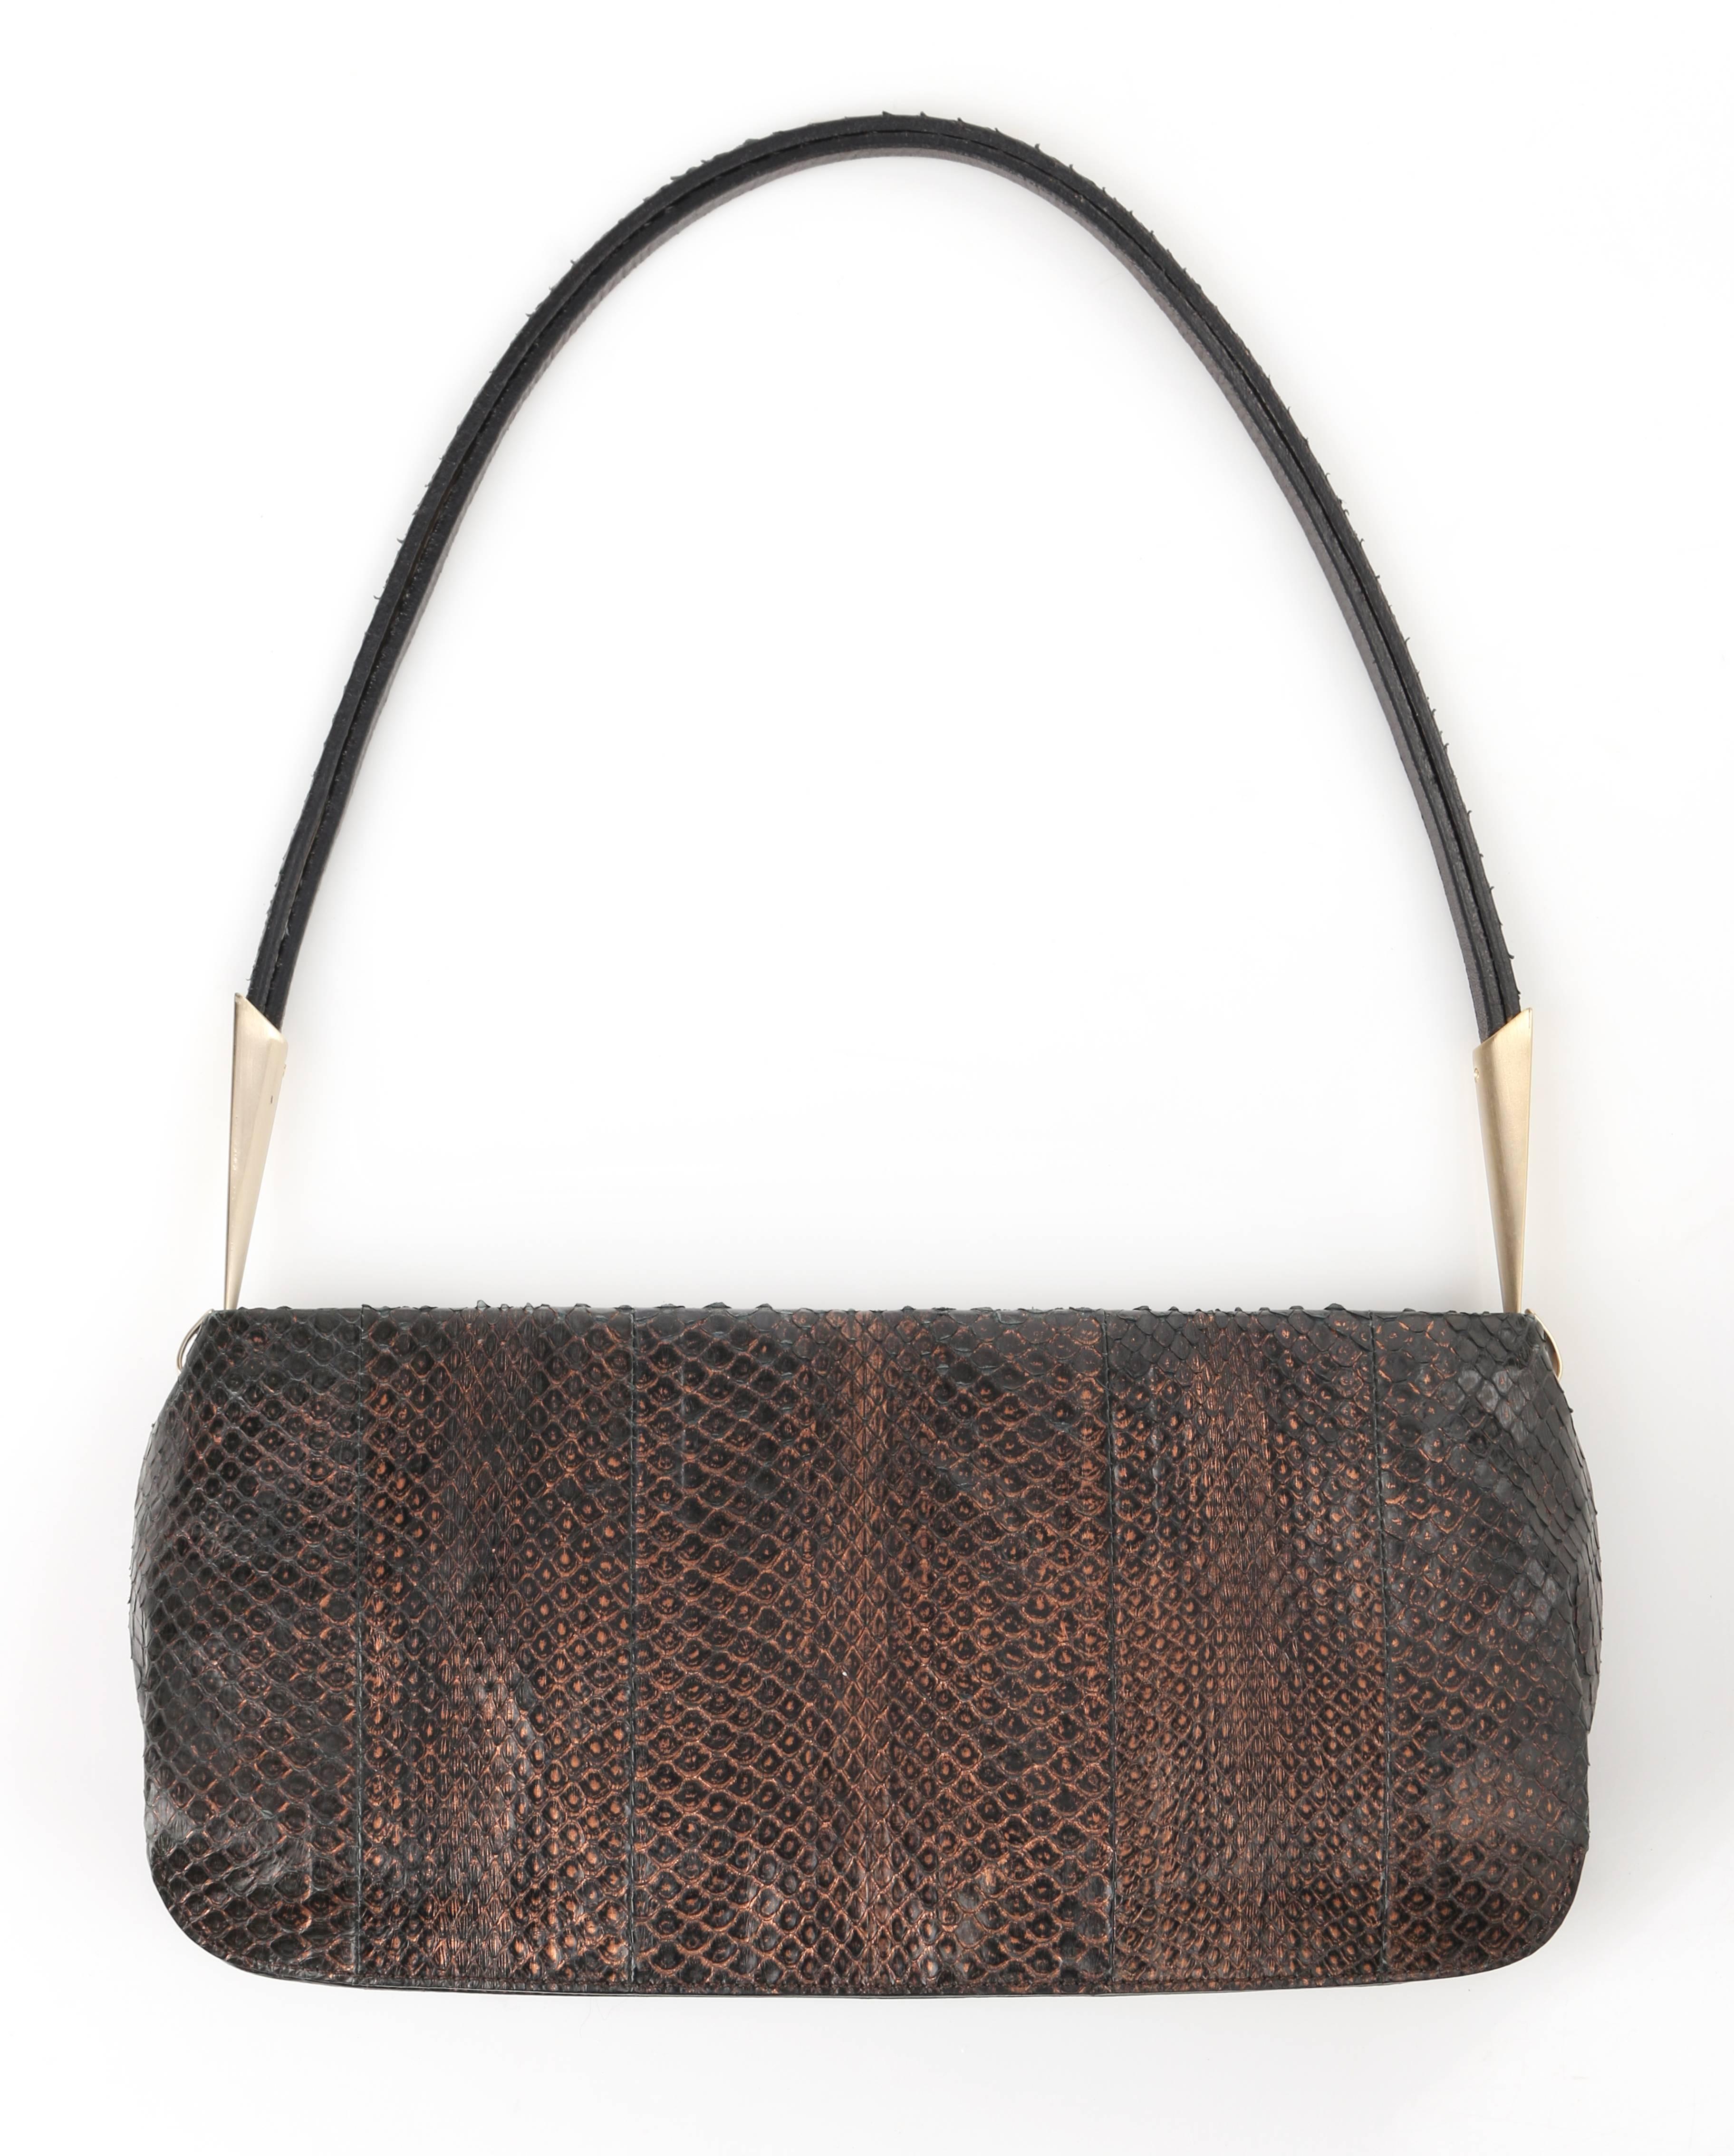 Bottega Veneta bronze metallic snakeskin leather baguette; New without tags. Single thin double layered snakeskin leather strap with brushed gold-toned metal hardware. Zip top closure with brown leather zipper pull. Black suede lined interior.